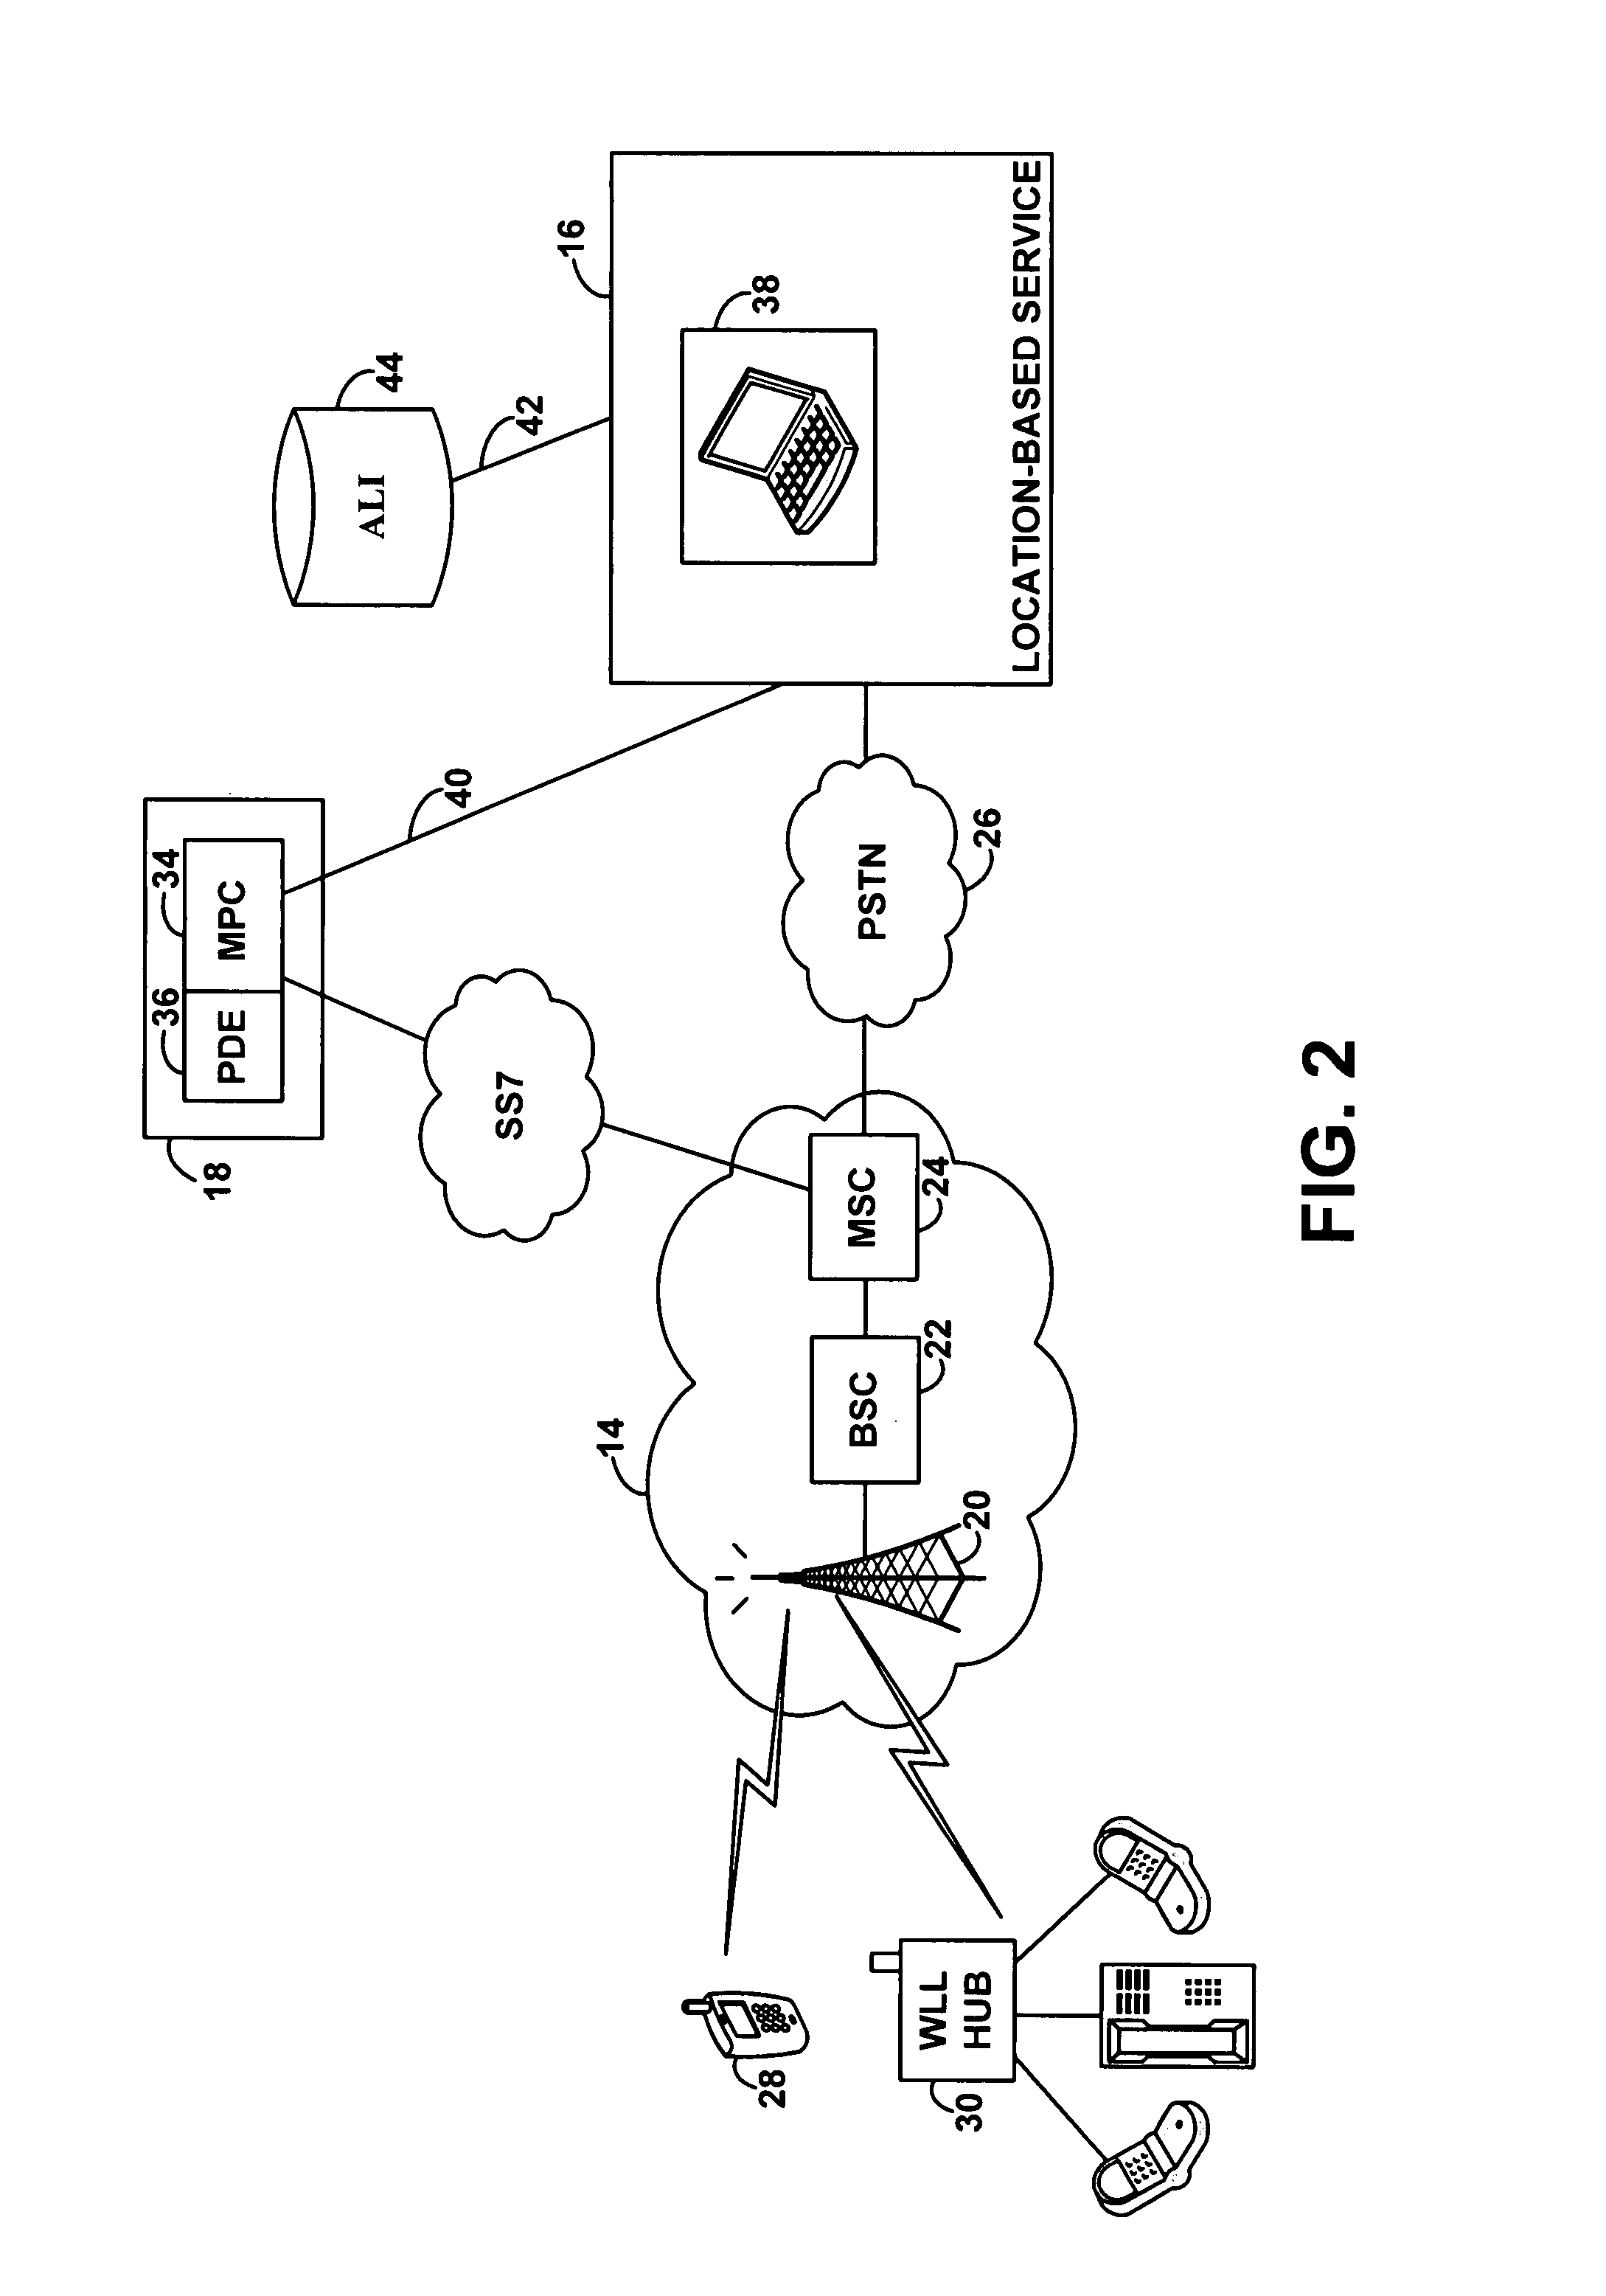 Method and system for tailoring output from a location-determination system